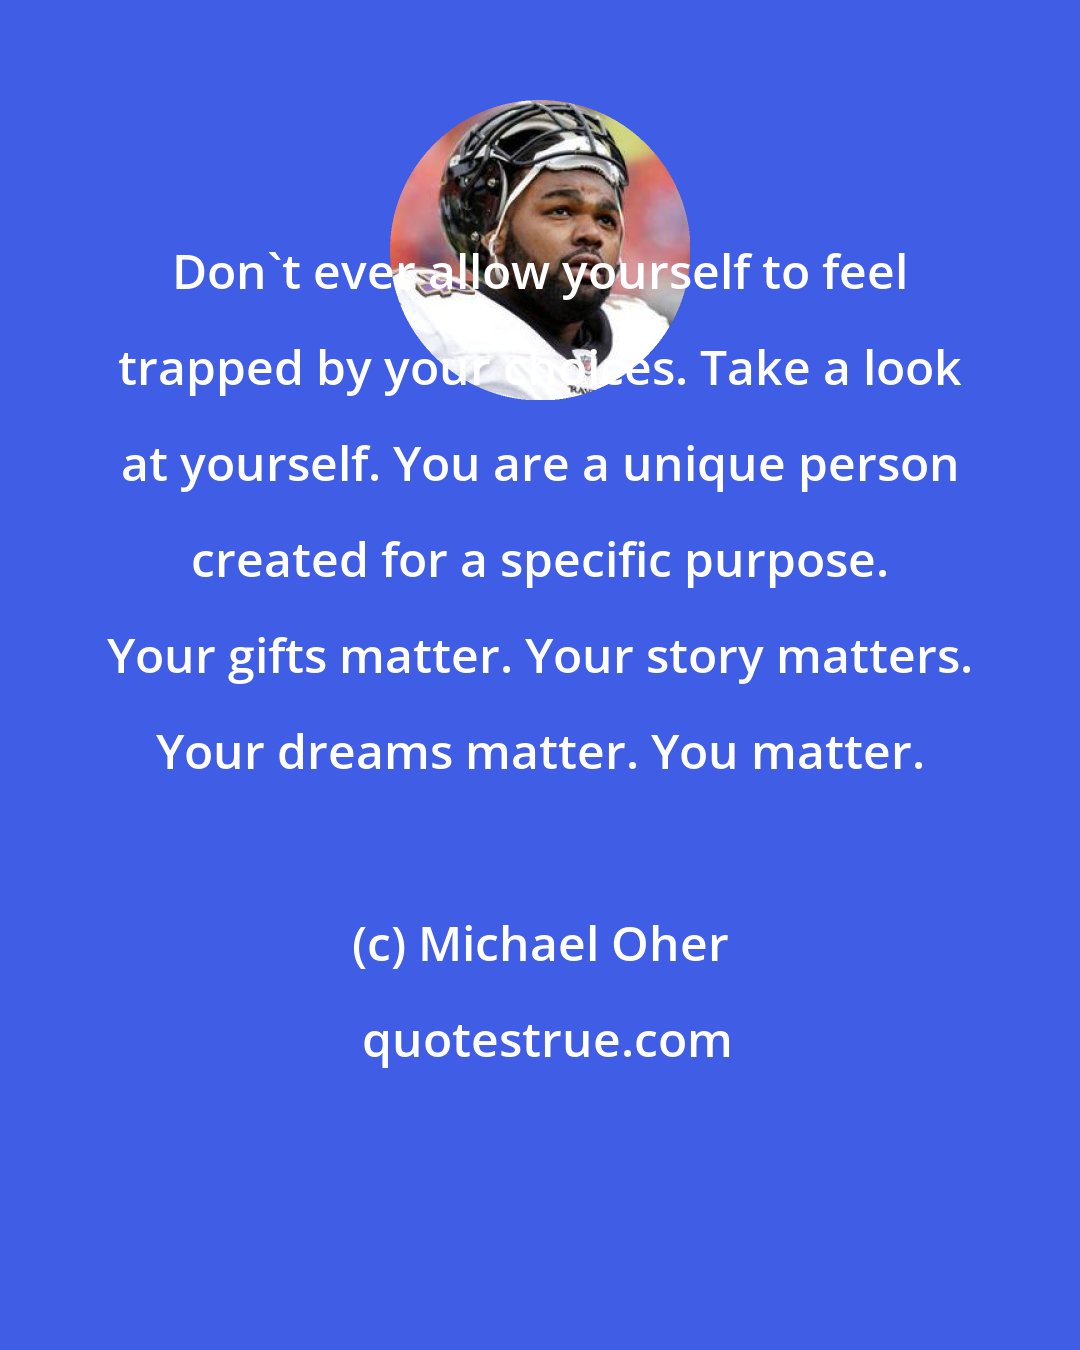 Michael Oher: Don't ever allow yourself to feel trapped by your choices. Take a look at yourself. You are a unique person created for a specific purpose. Your gifts matter. Your story matters. Your dreams matter. You matter.